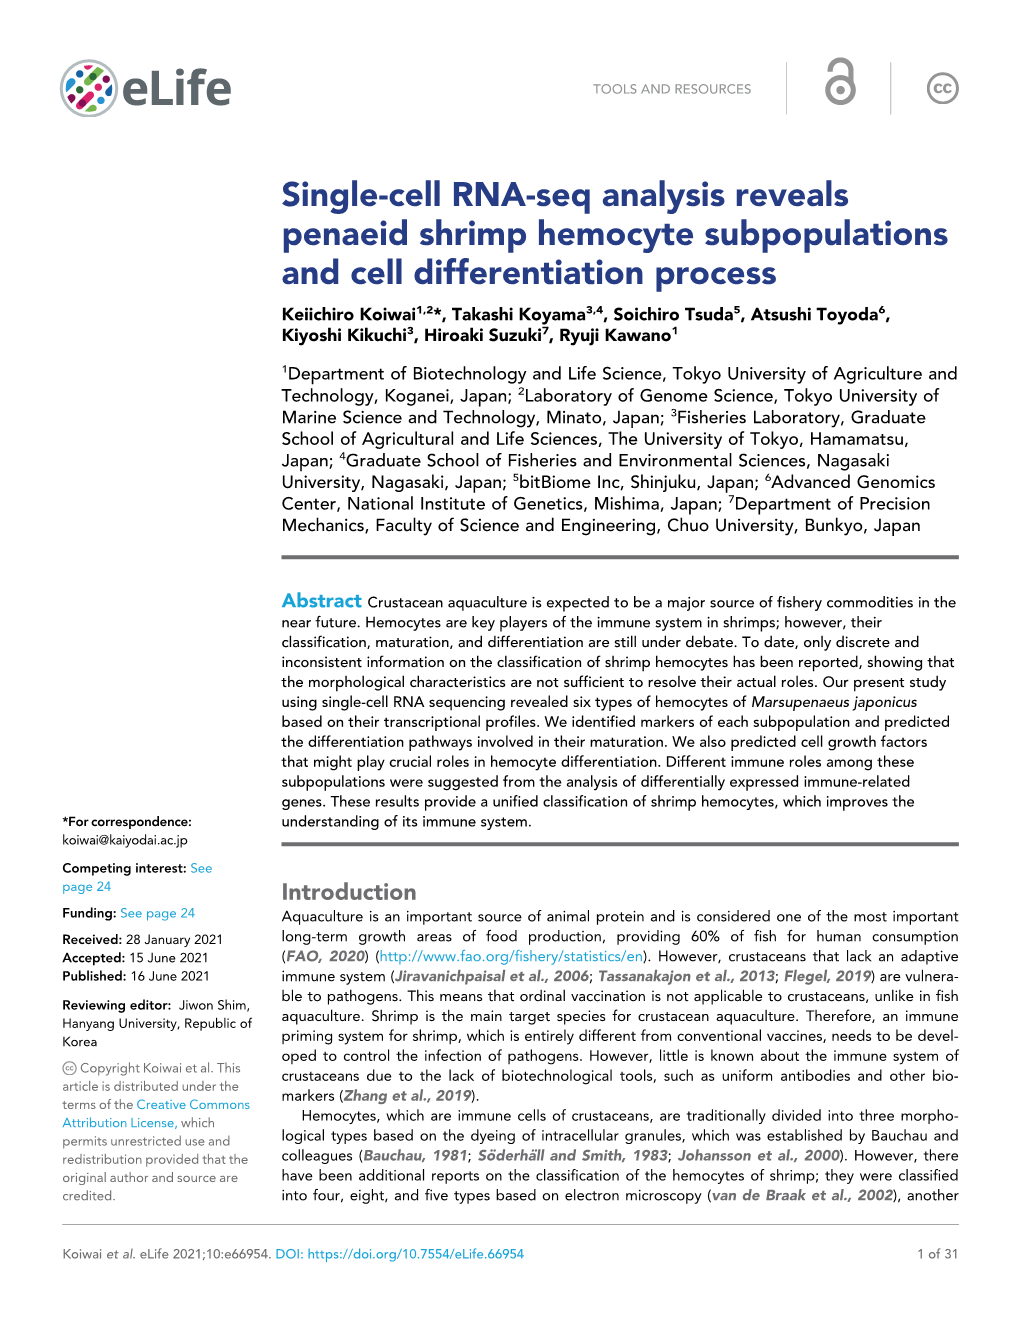 Single-Cell RNA-Seq Analysis Reveals Penaeid Shrimp Hemocyte Subpopulations and Cell Differentiation Process